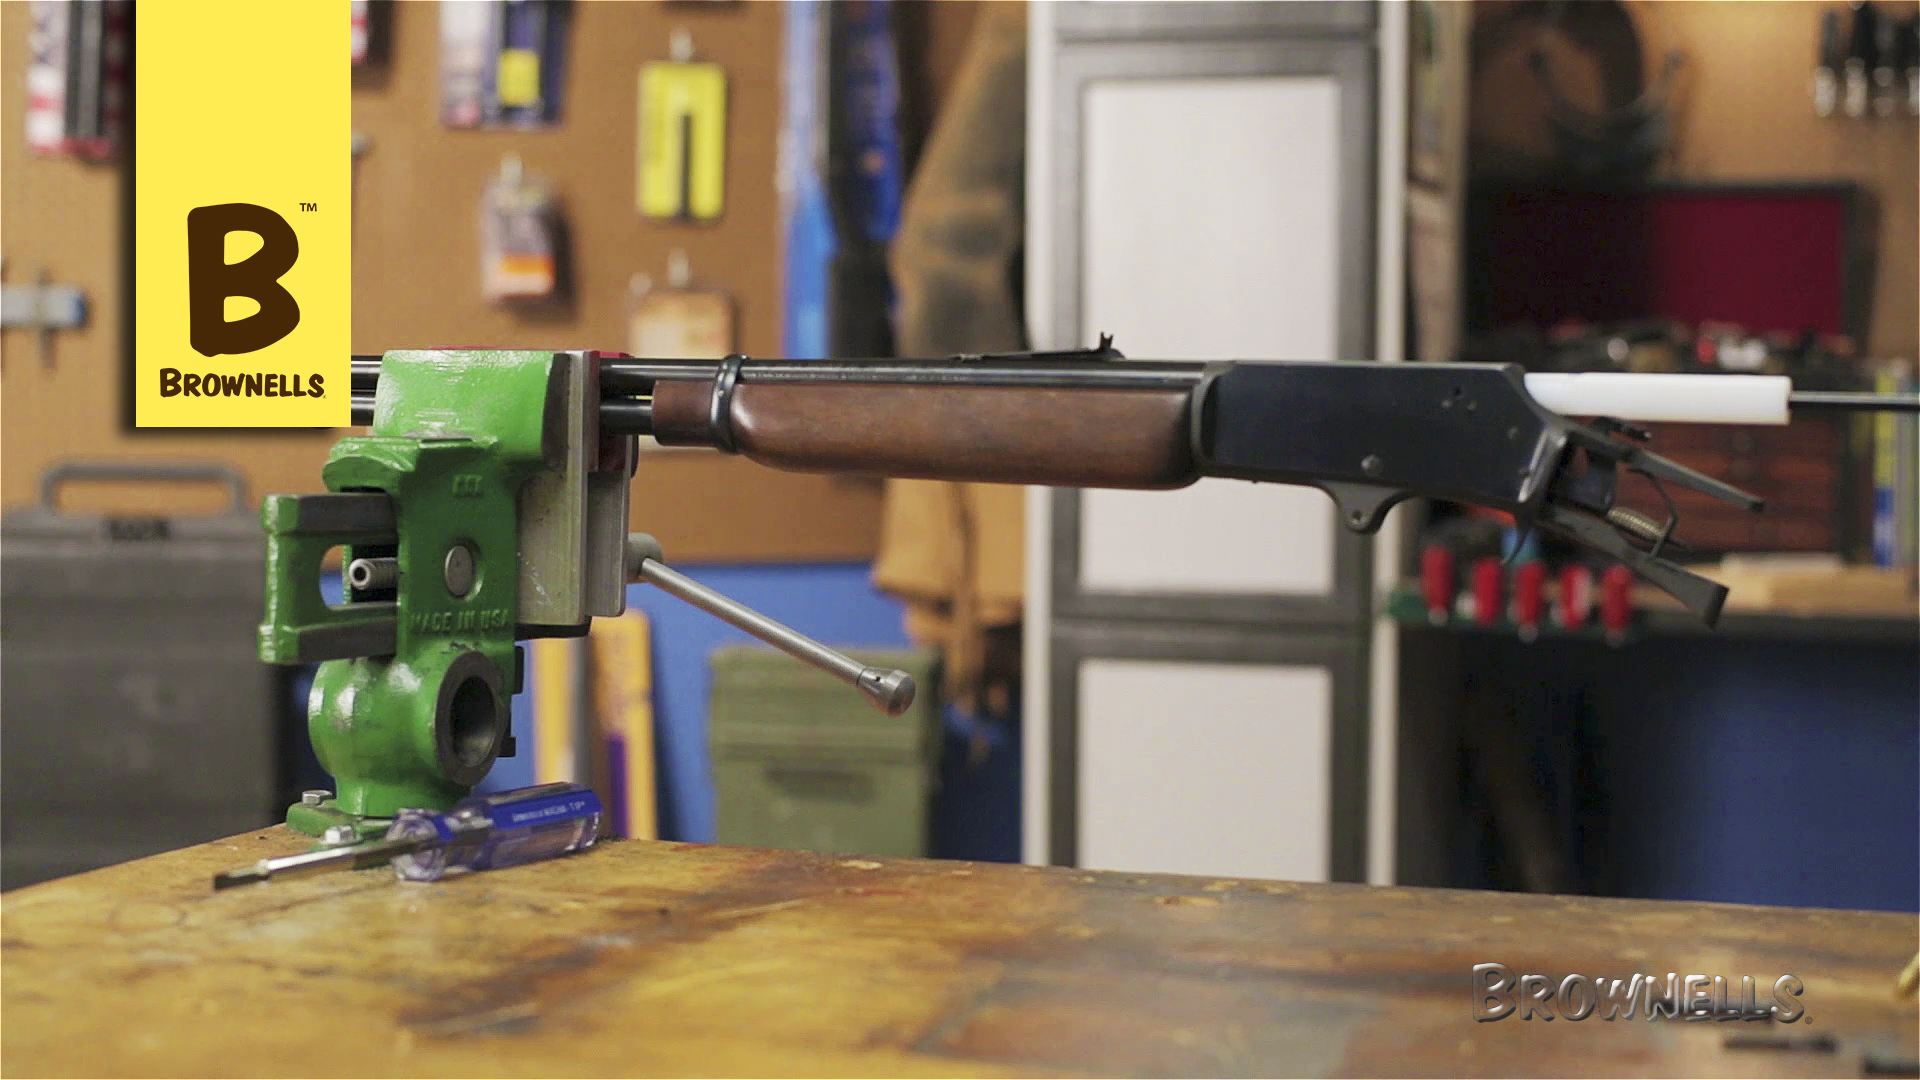 Firearm Maintenance Series: Marlin 336 Lever Action Cleaning, Part 2/4